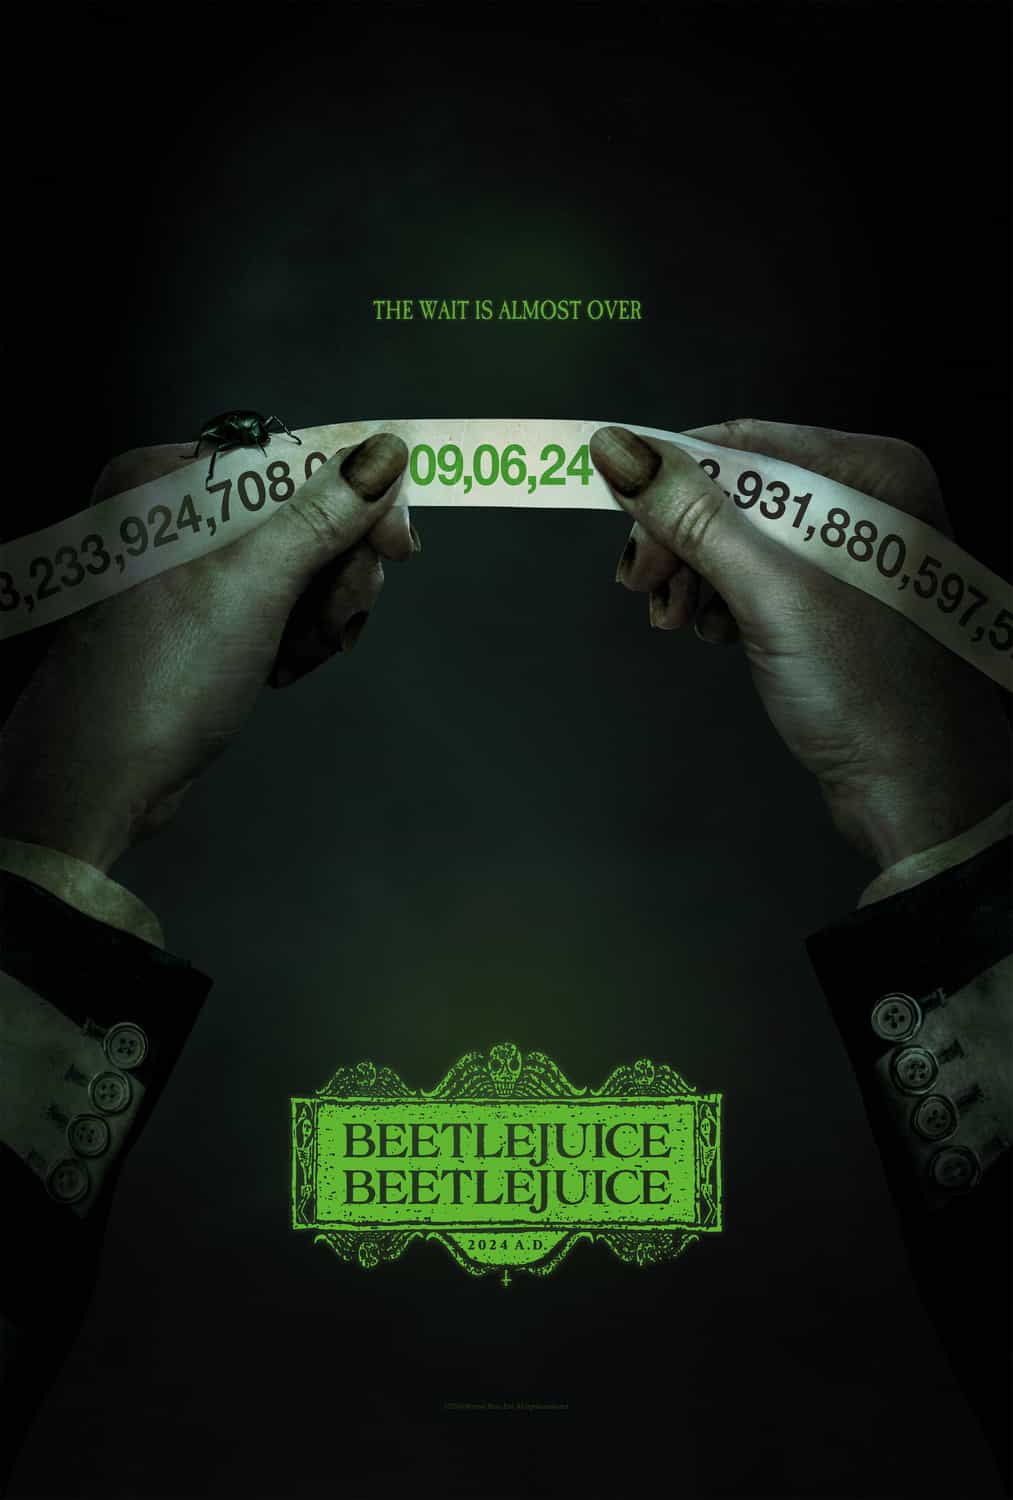 Check out the long awaited first trailer for upcoming movie Beetlejuice Beetlejuice which stars Michael Keaton and Jenna Ortega - movie UK release date 6th September 2024 #beetlejuicebeetlejuice